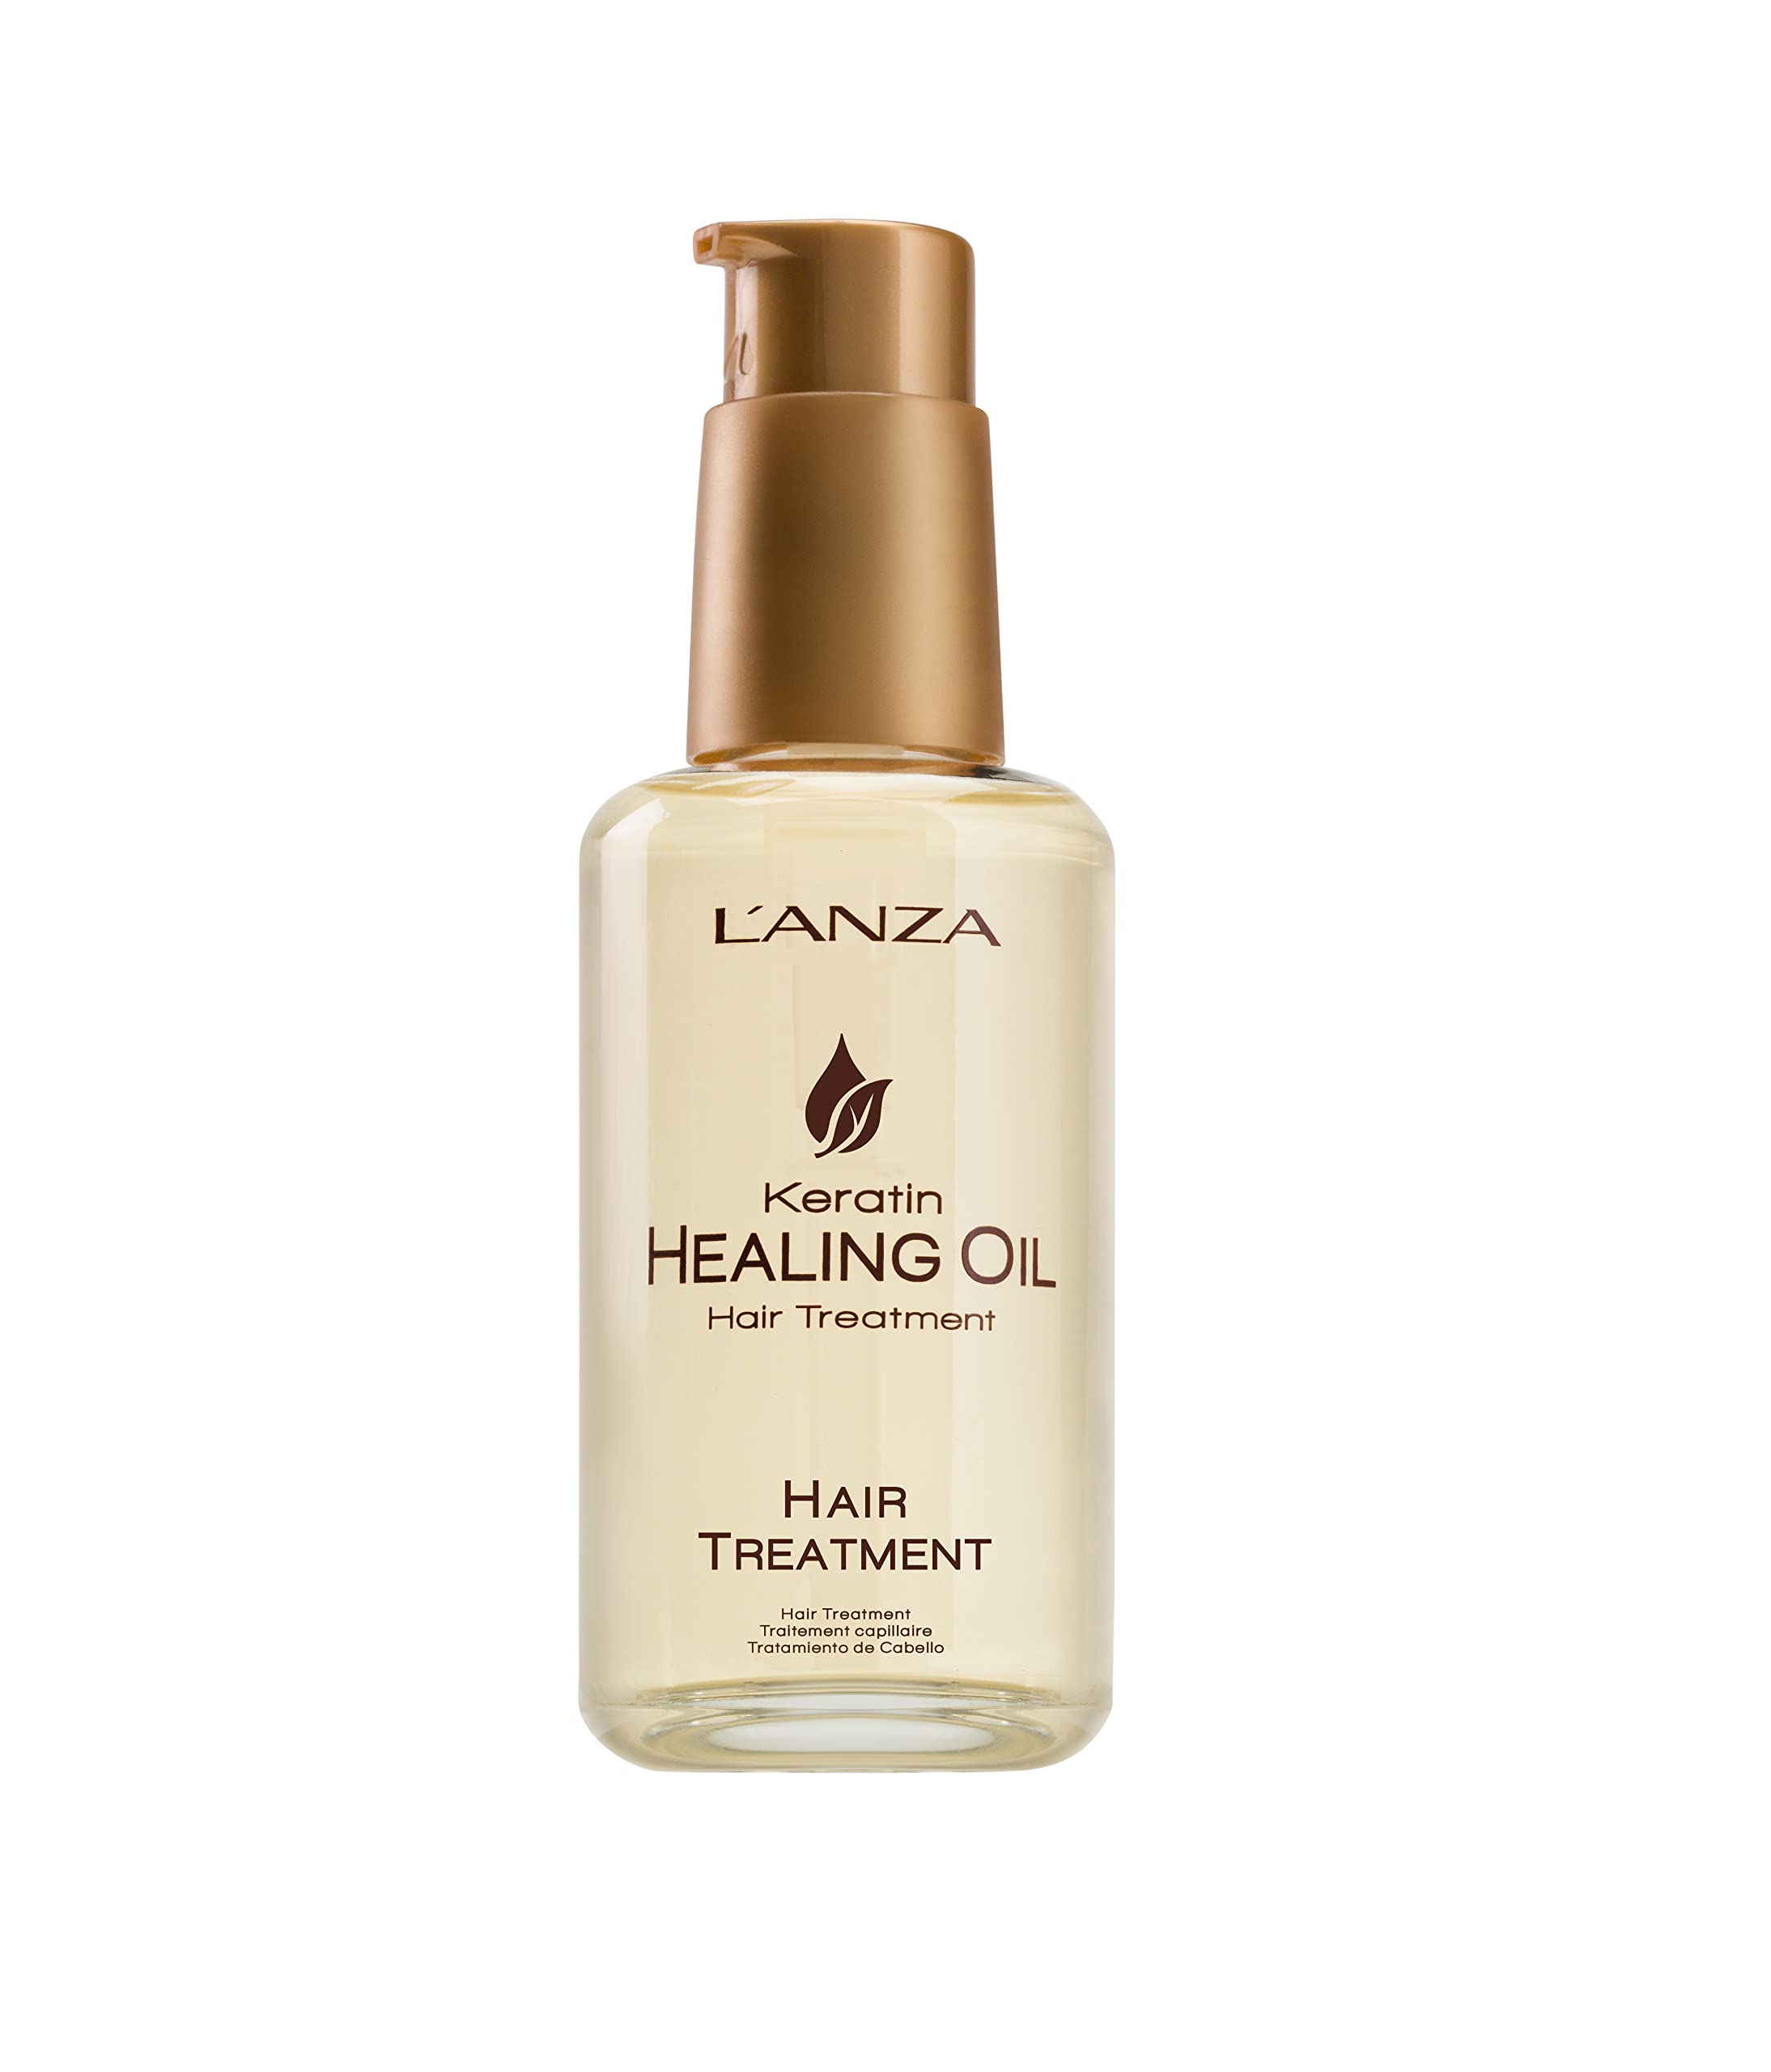 L'ANZA Keratin Healing Oil Treatment – Restores Revives and Nourishes Dry Damaged Hair & Scalp With Restorative Phyto IV Complex Protein UV Protection